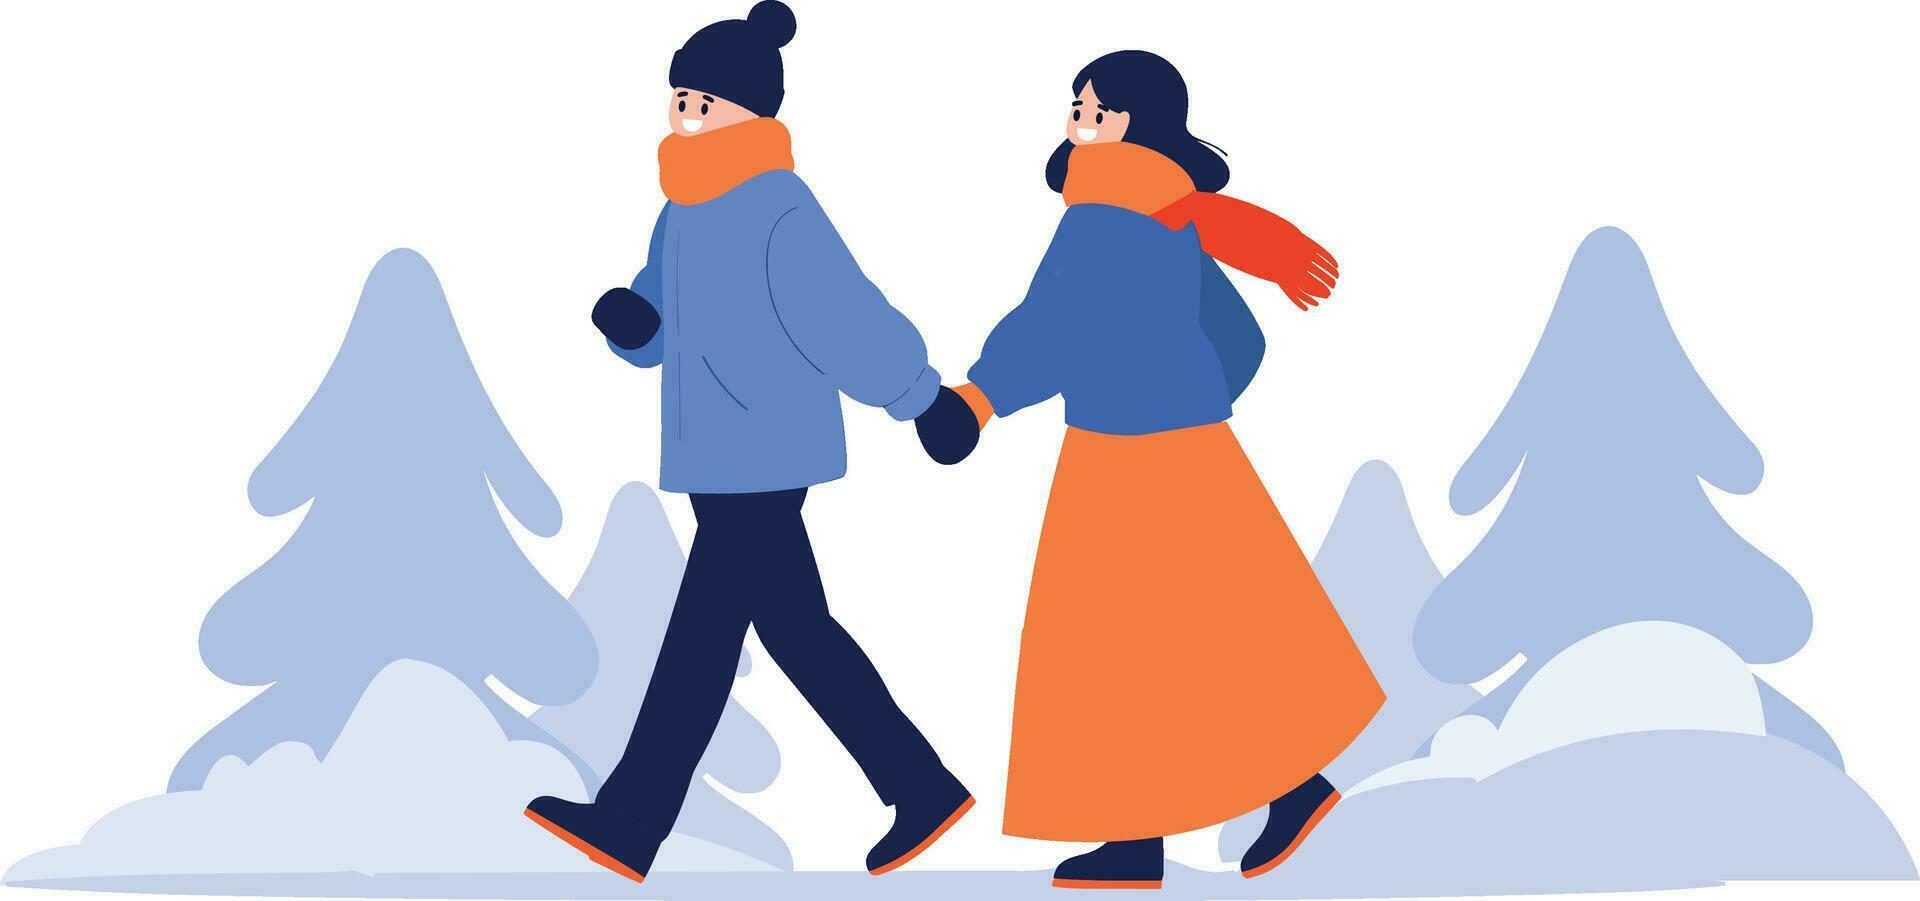 Hand Drawn couple wearing winter clothing walks on a path filled with snow in flat style vector